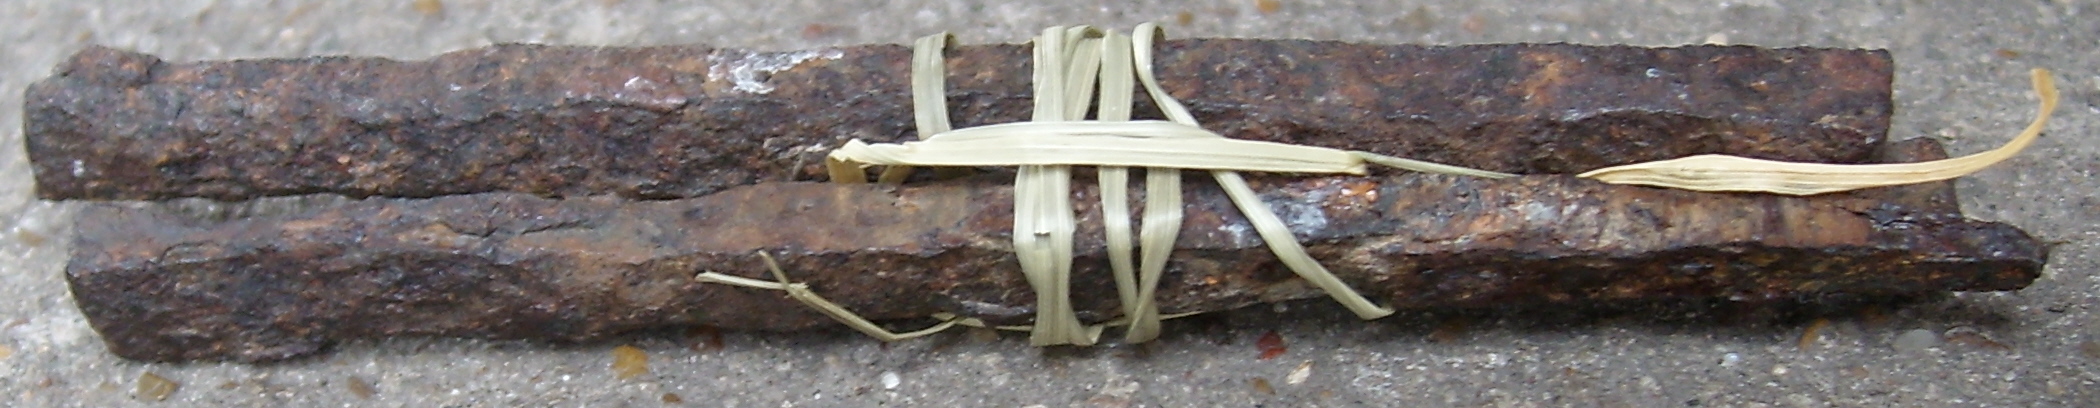 Enlarged view of nails from the house on the Michael Korns, Sr. farm